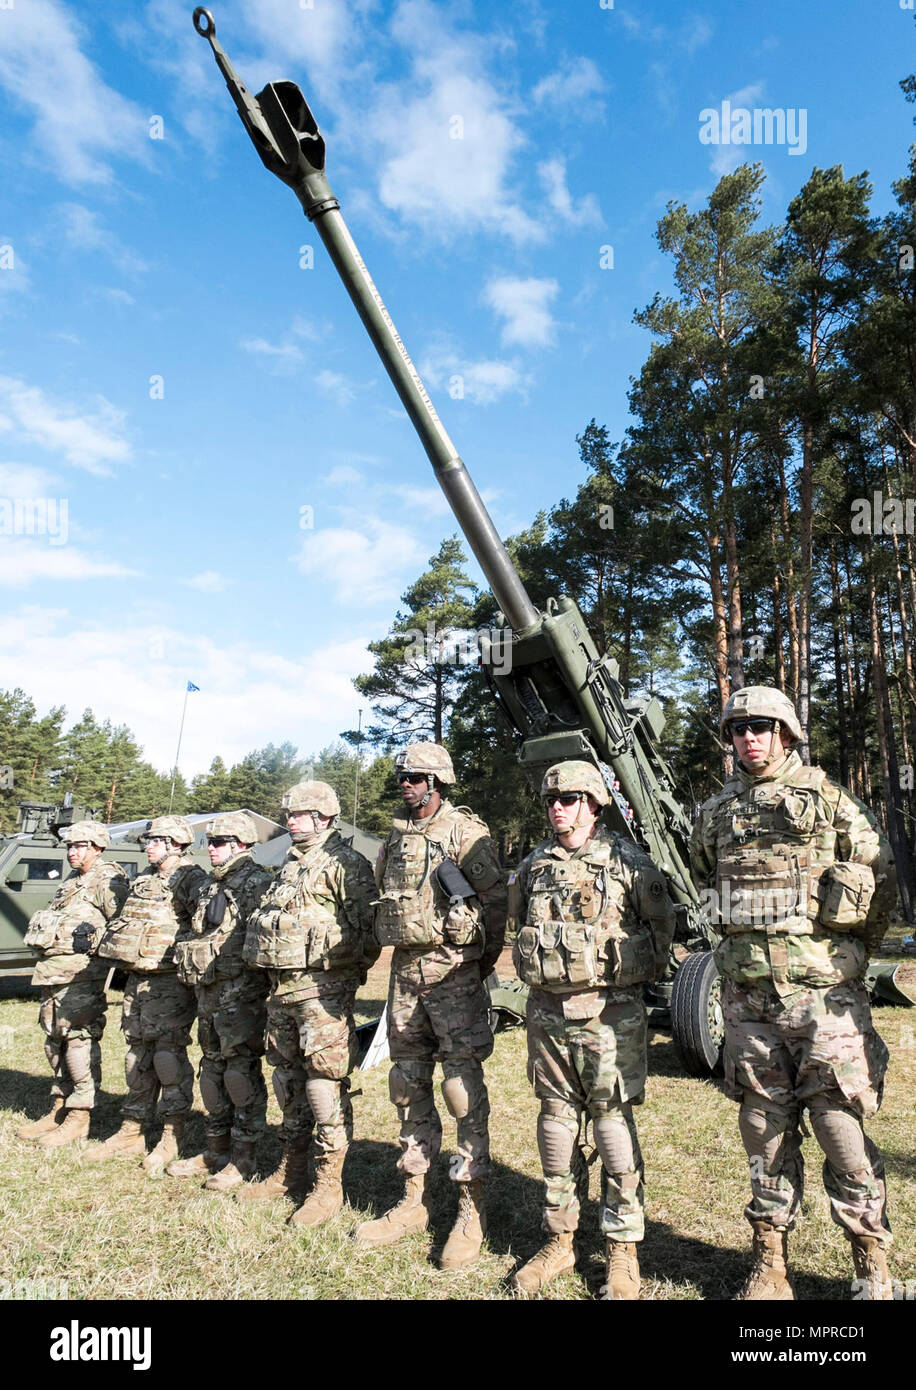 U.S. Army Soldiers stand by their howitzer static display during rehearsal for Battle Group Poland's welcome ceremony scheduled for April 13 near Orzysz, Poland.  The unique, multinational battle group, comprised of U.S., U.K., Romanian and Polish soldiers, will serve as a deterrence force in northeast Poland in support of NATO's Enhanced Forward Presence. Stock Photo